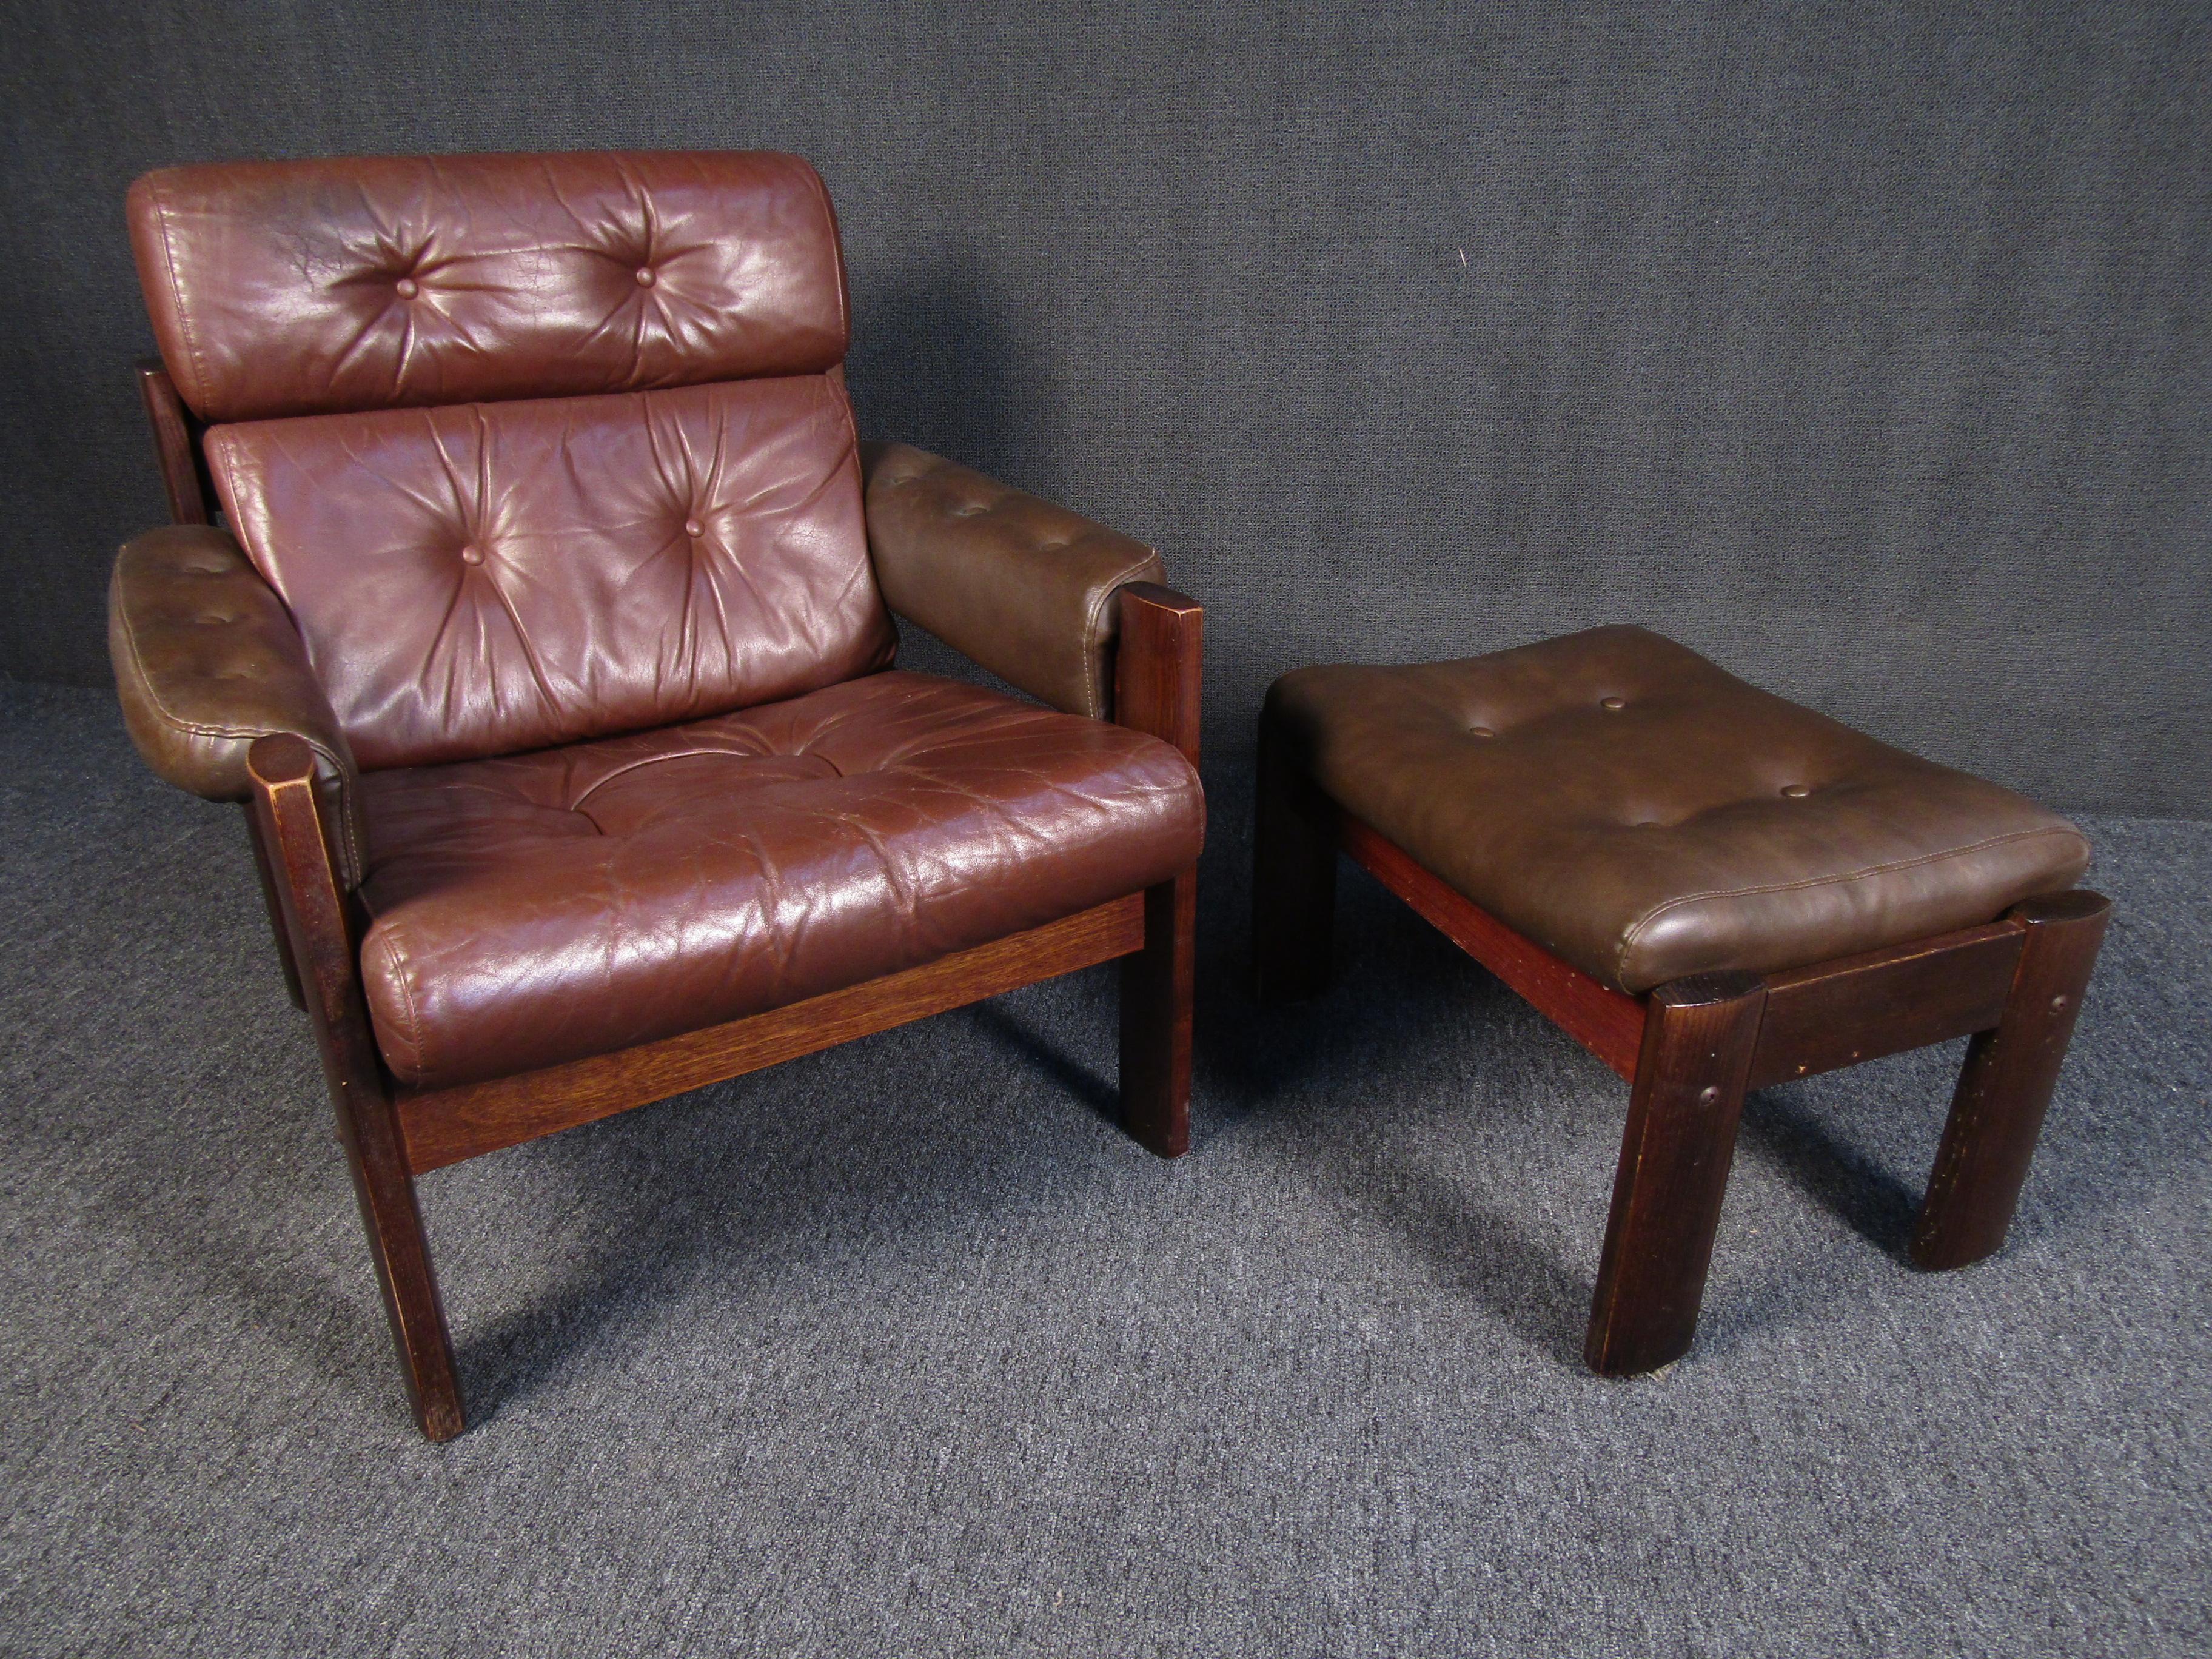 An elegant Mid-Century Modern lounge chair and ottoman that showcases two shades of leather and a rich walnut frame. Full of sophistication and character, this set is sure to be a comfortable spot for enjoying a book or relaxing. Please confirm item